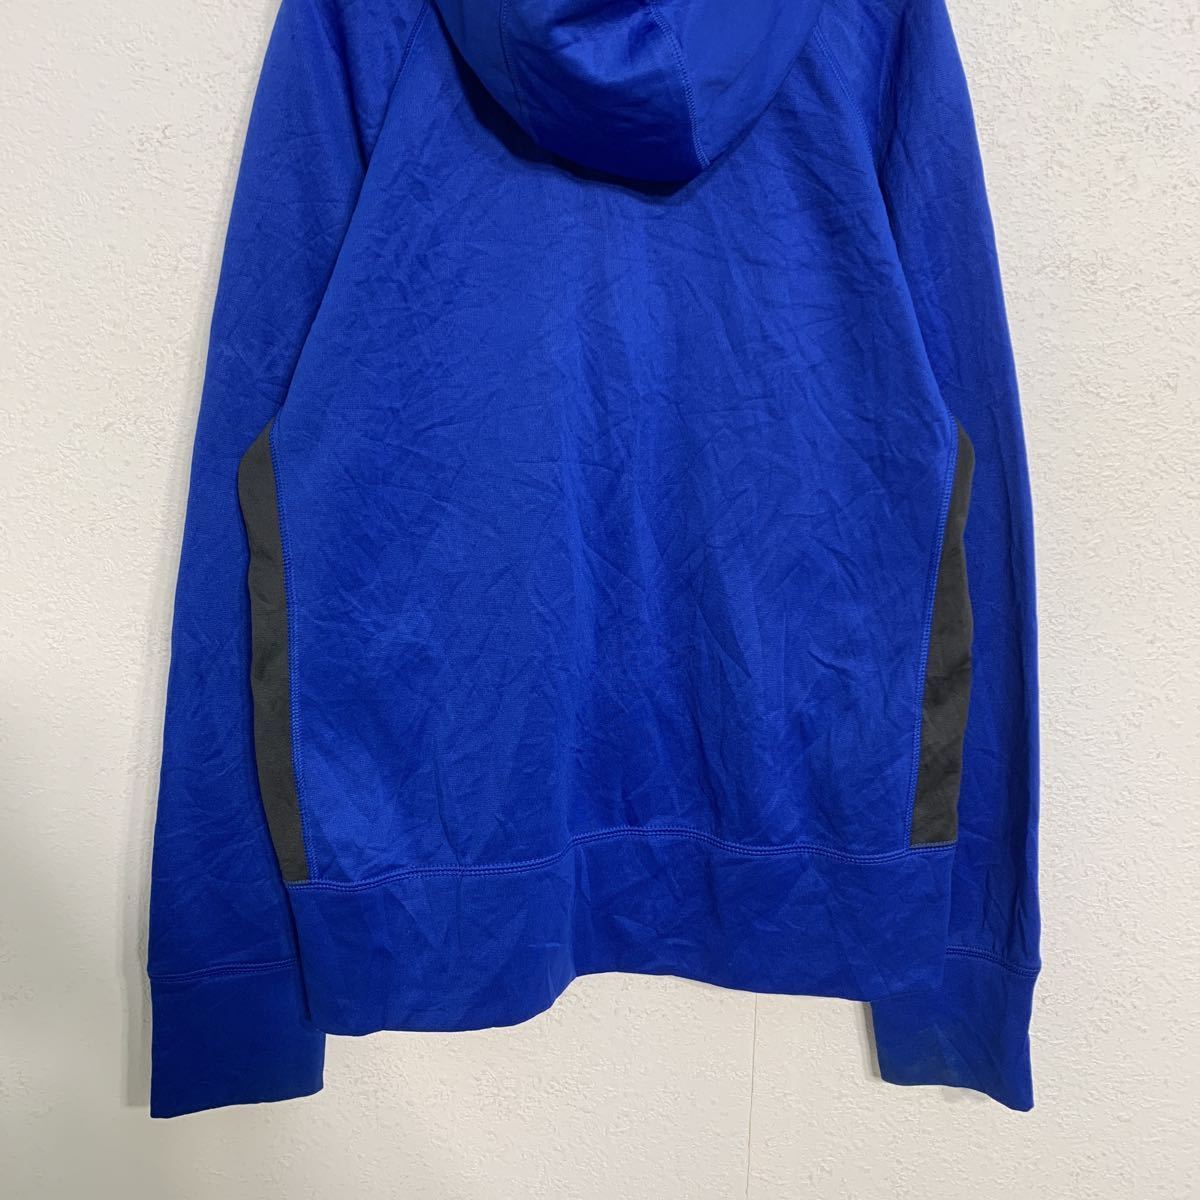 NIKE Zip up jersey jacket M blue black Nike sport THERMA FIT old clothes . America stock a408-5600